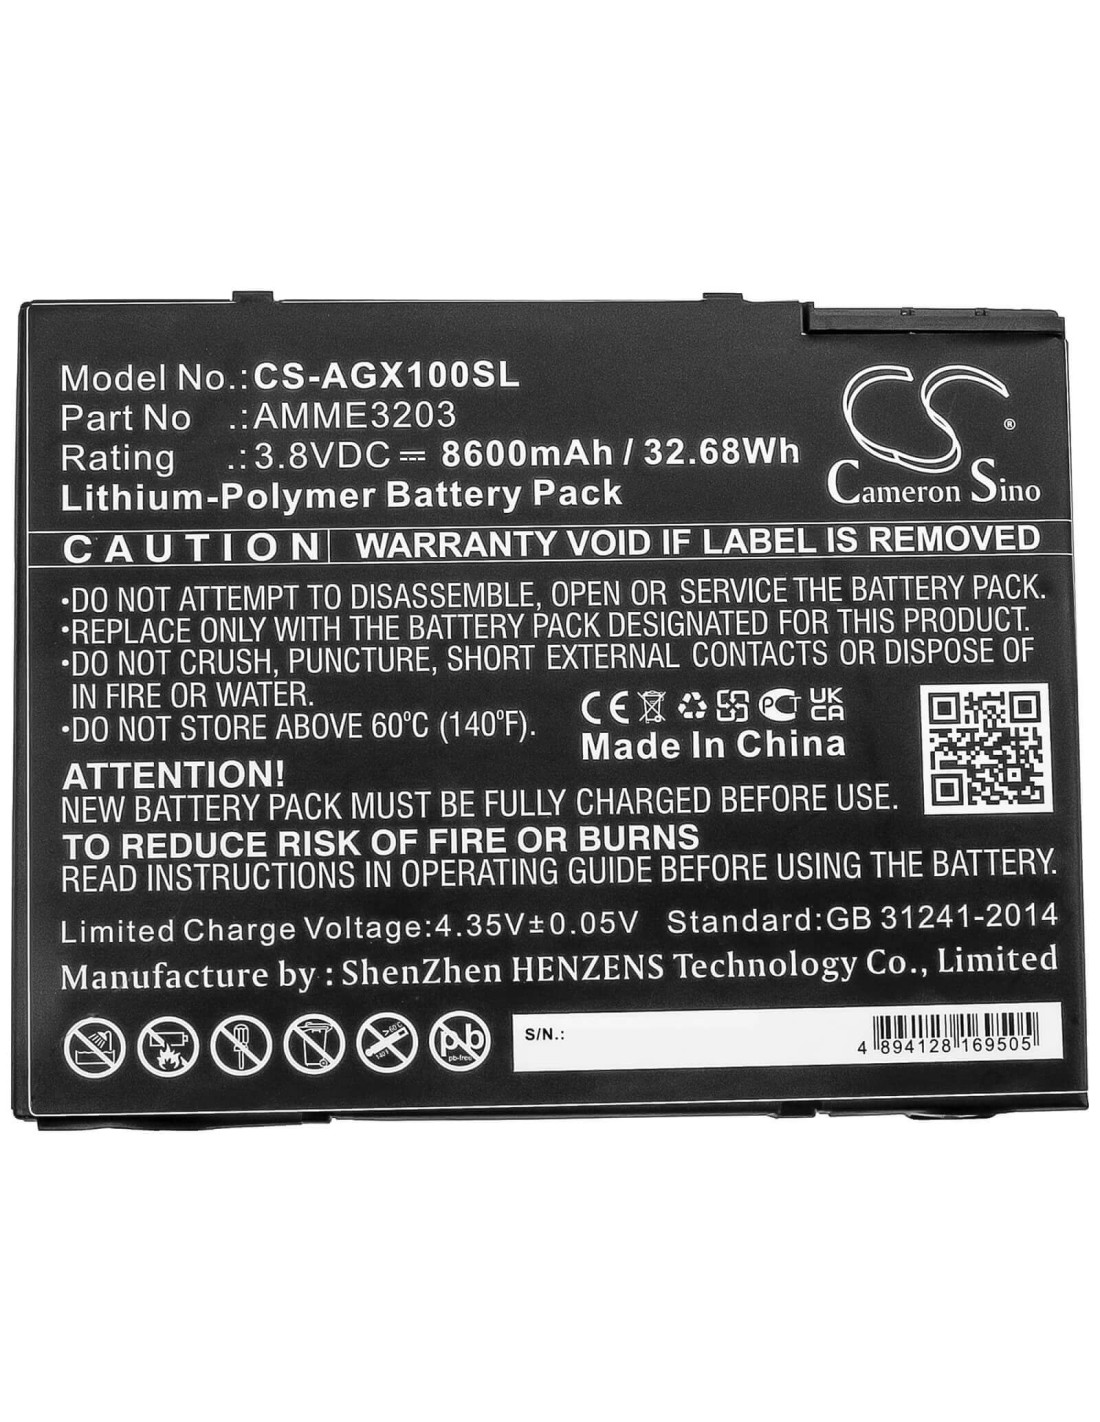 Battery for Aegex, 10 Intrinsically Safe Tablet, 10 Tablets 3.8V, 8600mAh - 32.68Wh